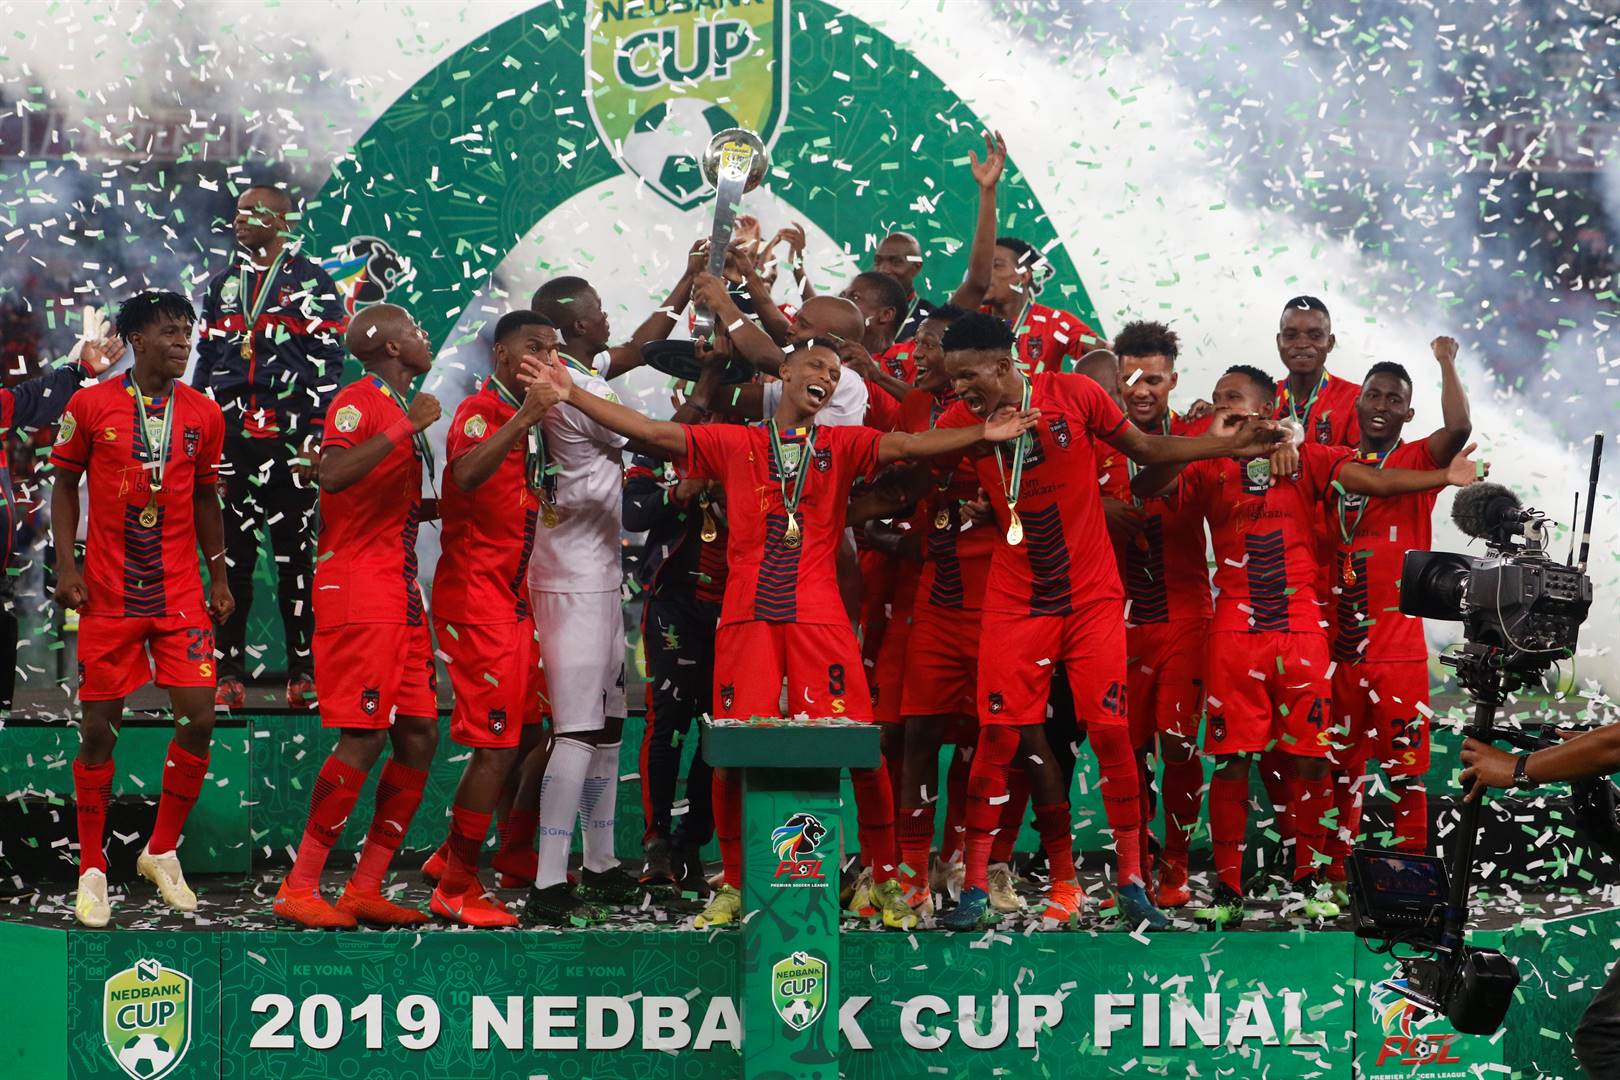 TS Galaxy are crowned champions after the Nedbank Cup final match between Kaizer Chiefs and TS Galaxy at Moses Mabhida Stadium on Saturday (May 18 2019) in Durban, South Africa. Picture: Anesh Debiky/Gallo Images